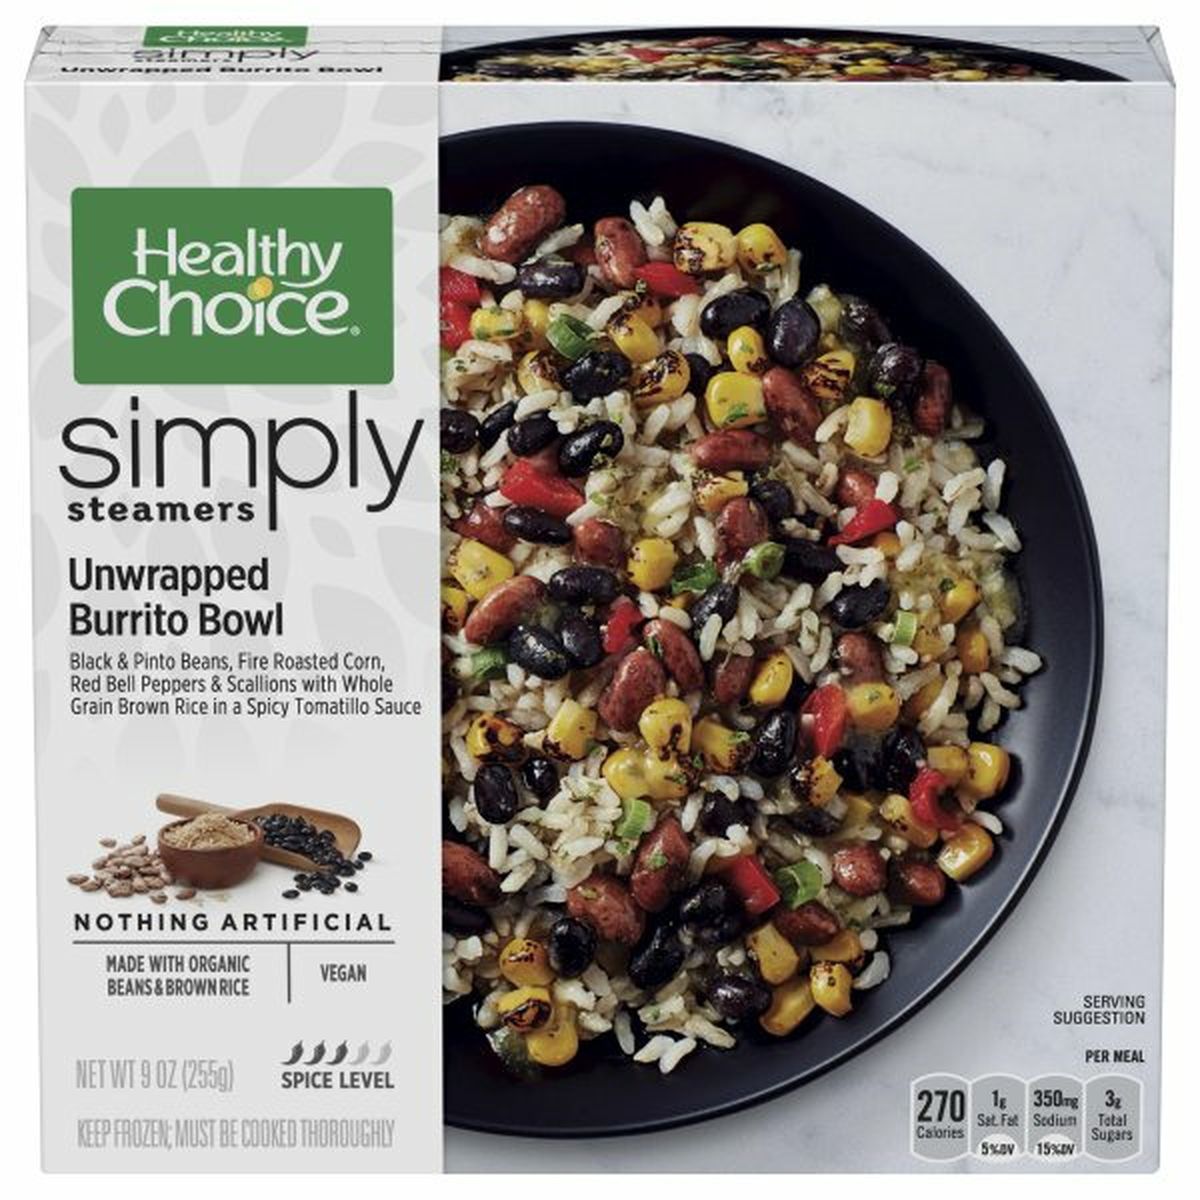 Calories in Healthy Choice Simply Steamers Unwrapped Burrito Bowl